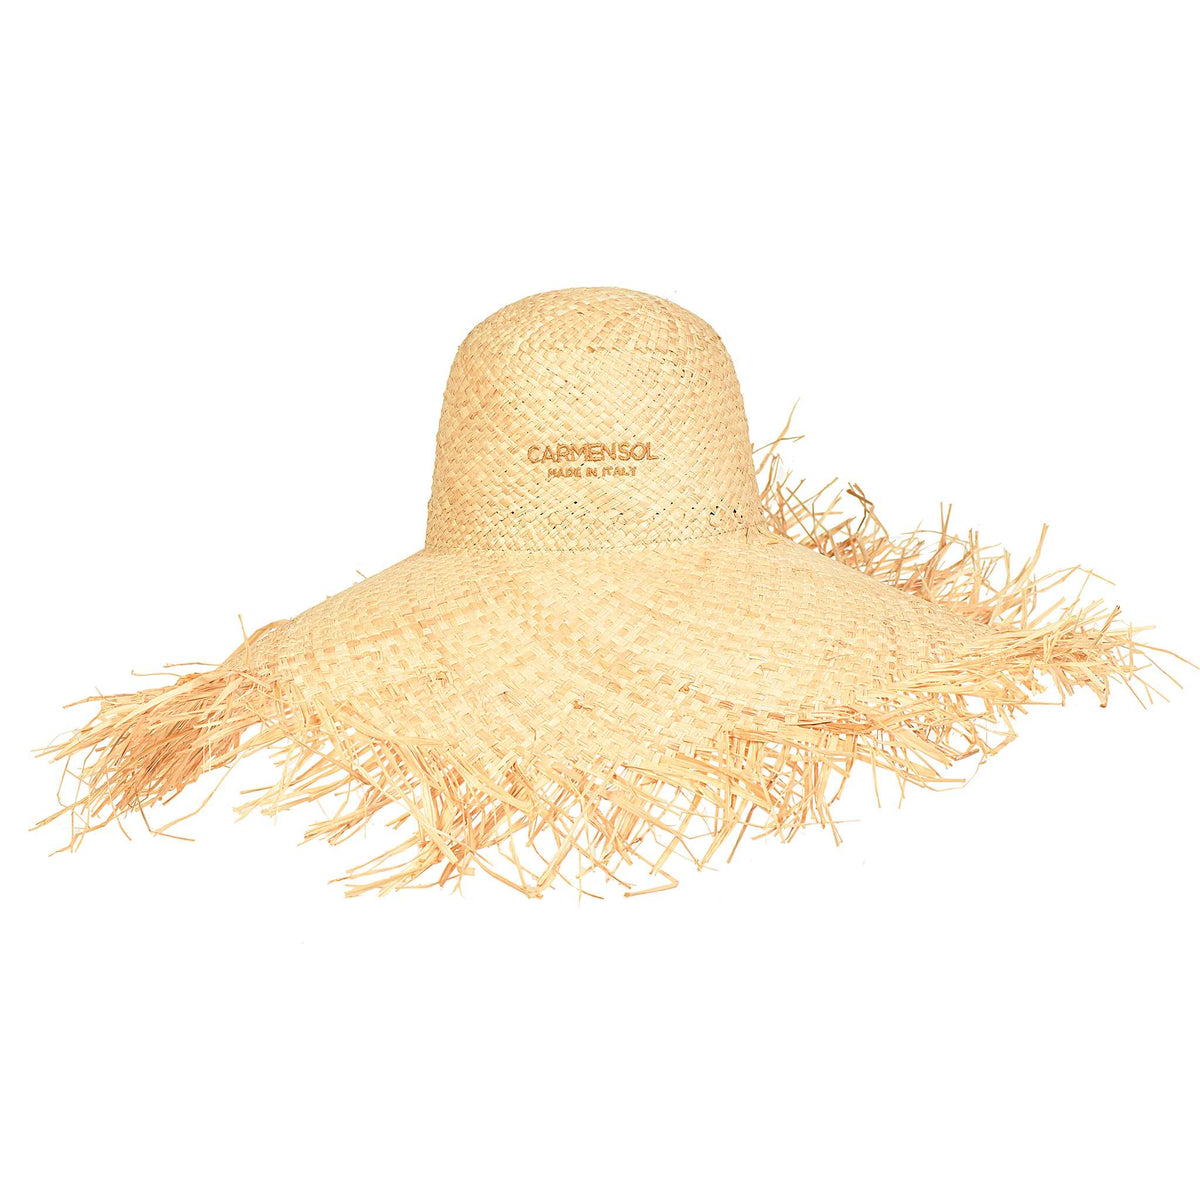 Made in Italy with natural raffia Severino sun protection hat in color nude